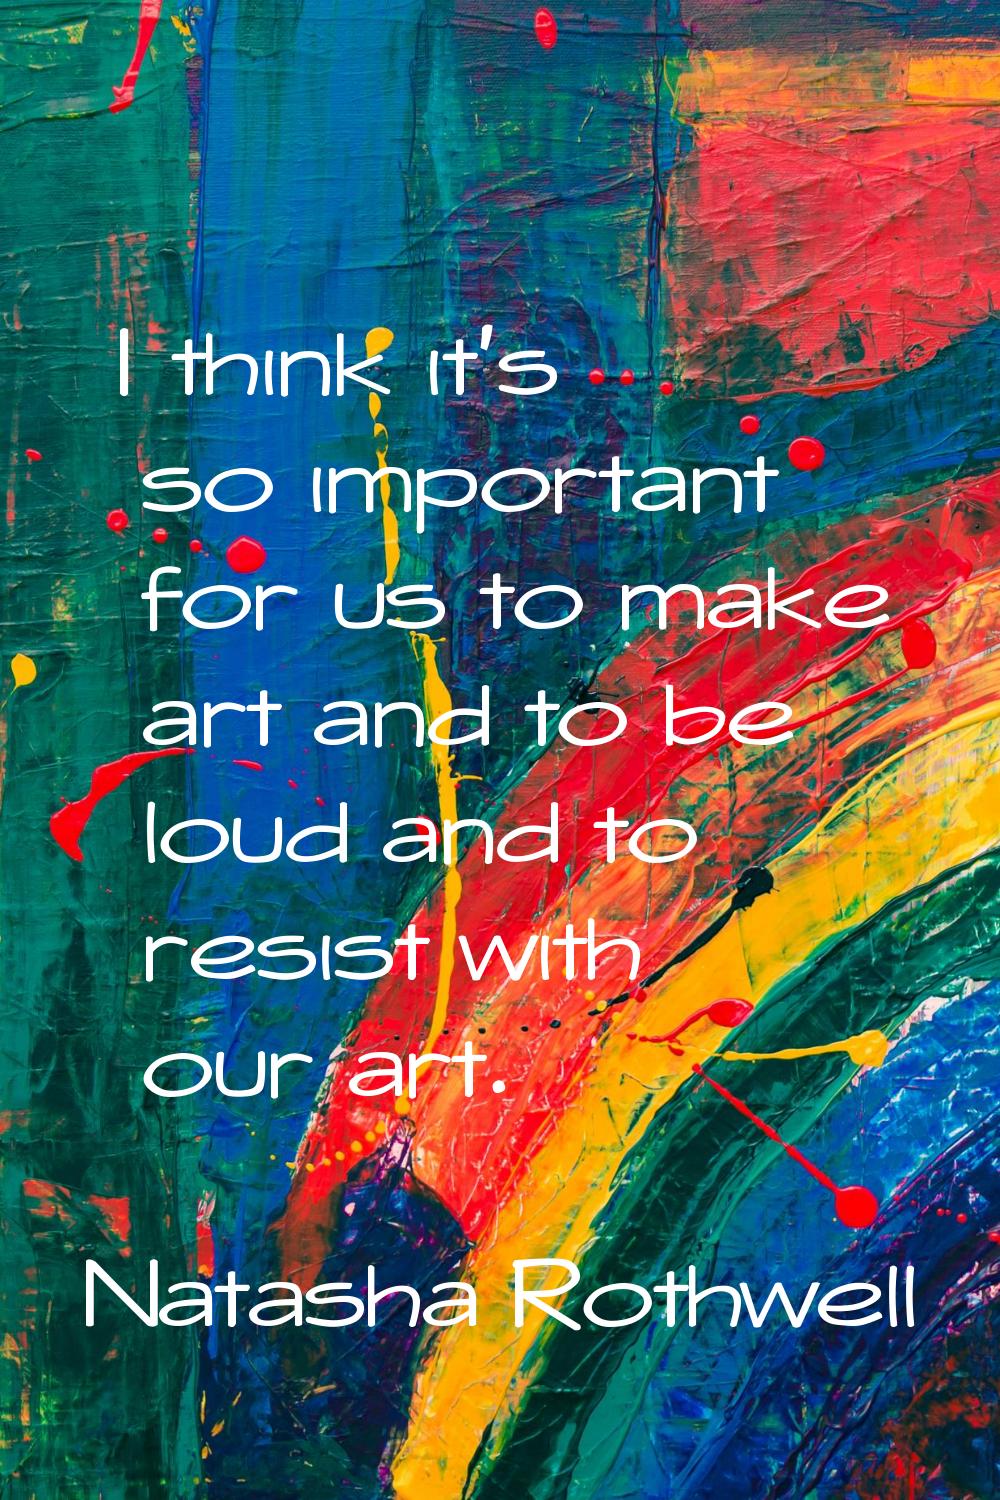 I think it's so important for us to make art and to be loud and to resist with our art.